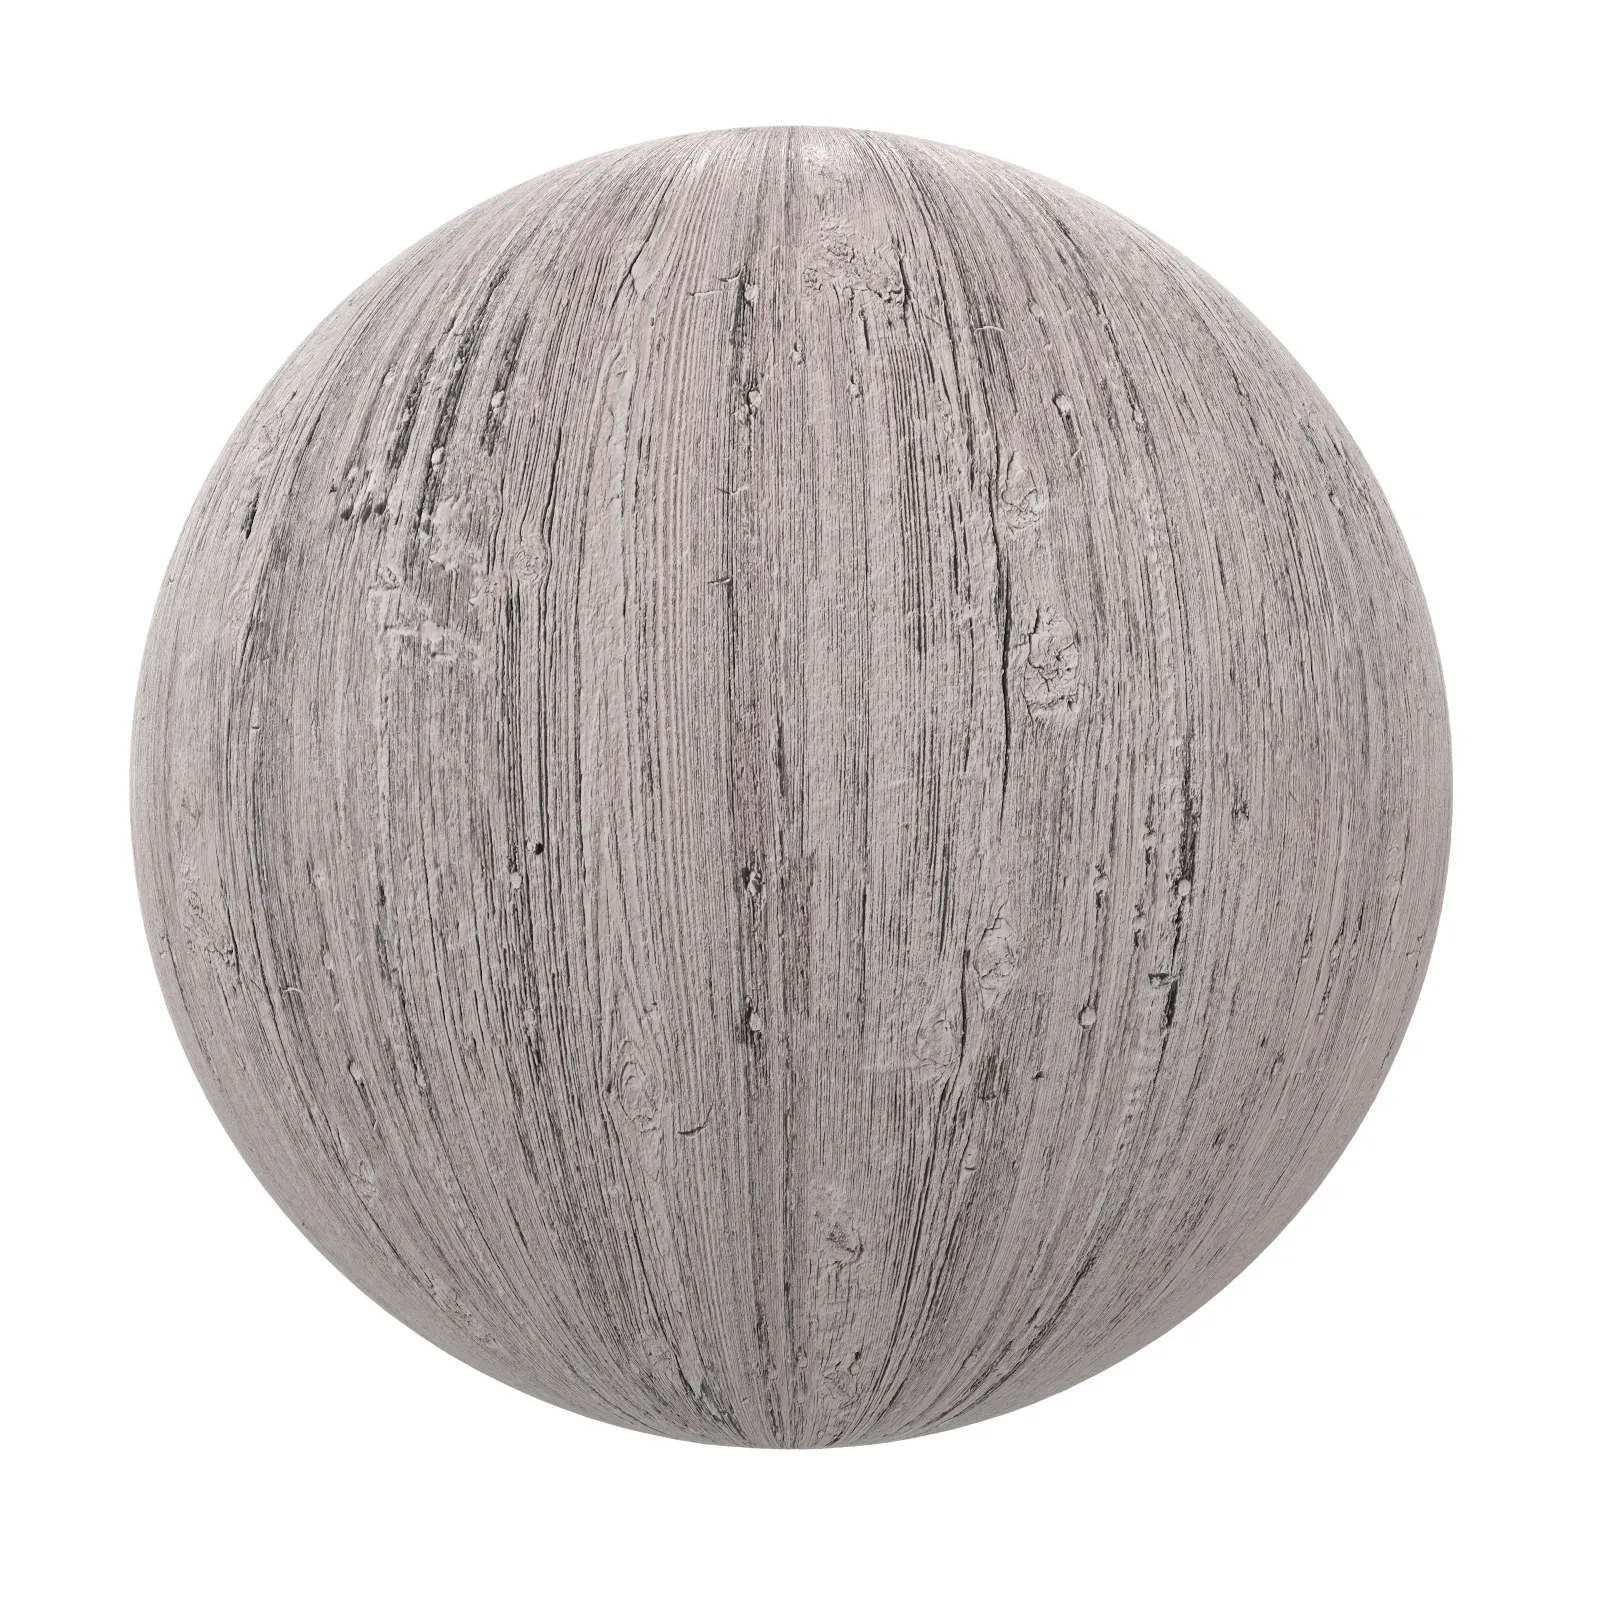 TEXTURES – WOOD – White Painted Old Wood